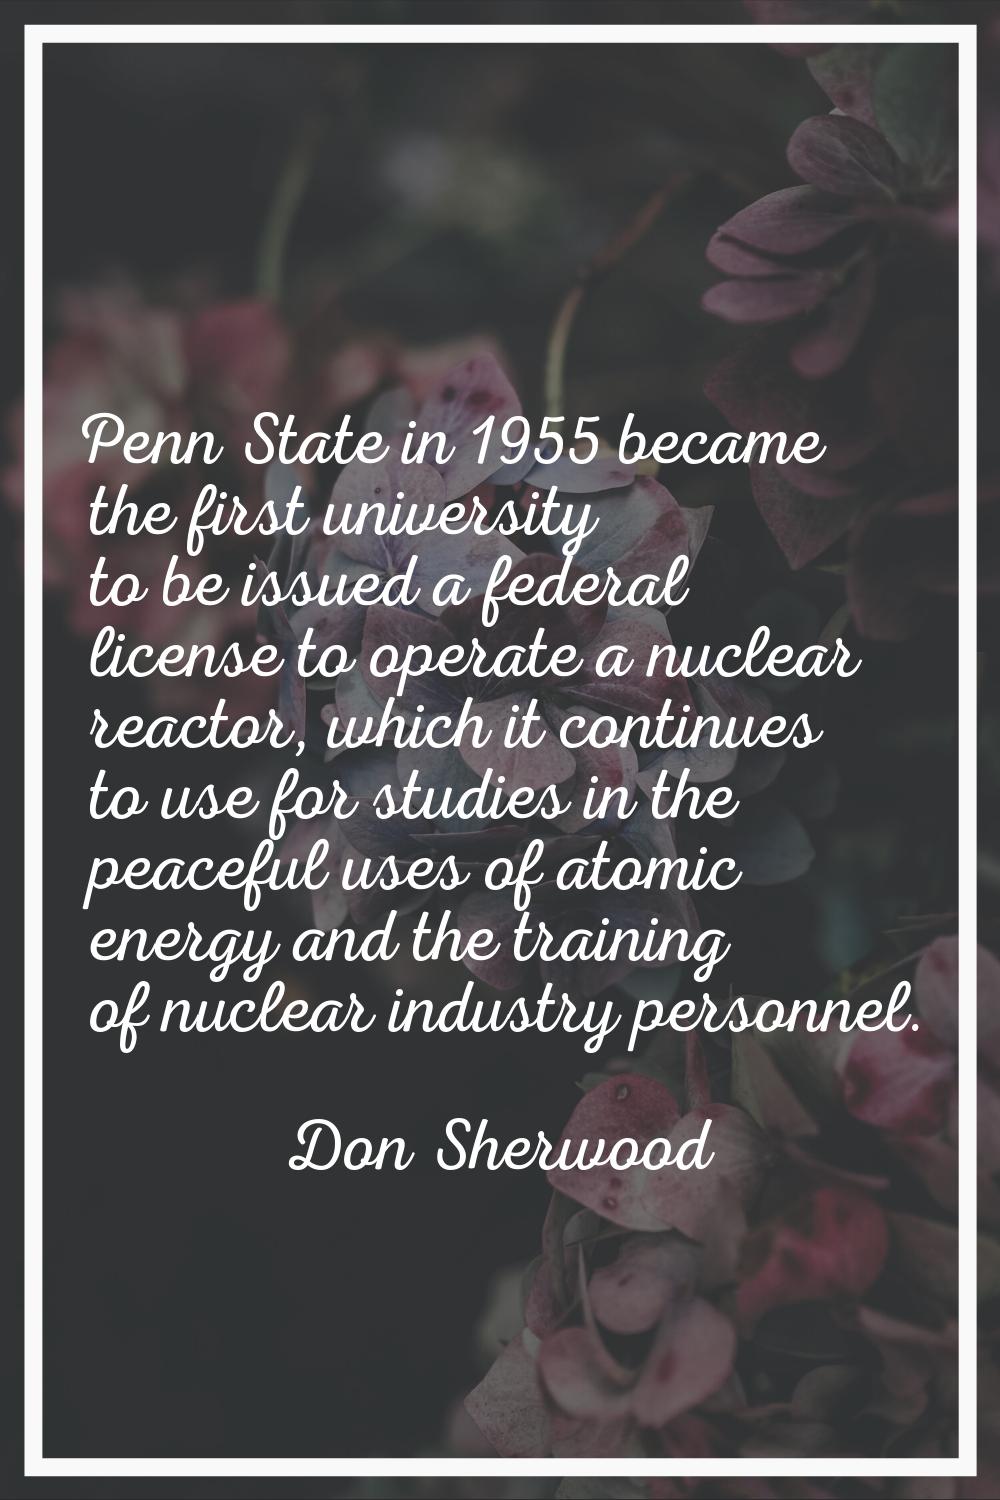 Penn State in 1955 became the first university to be issued a federal license to operate a nuclear 